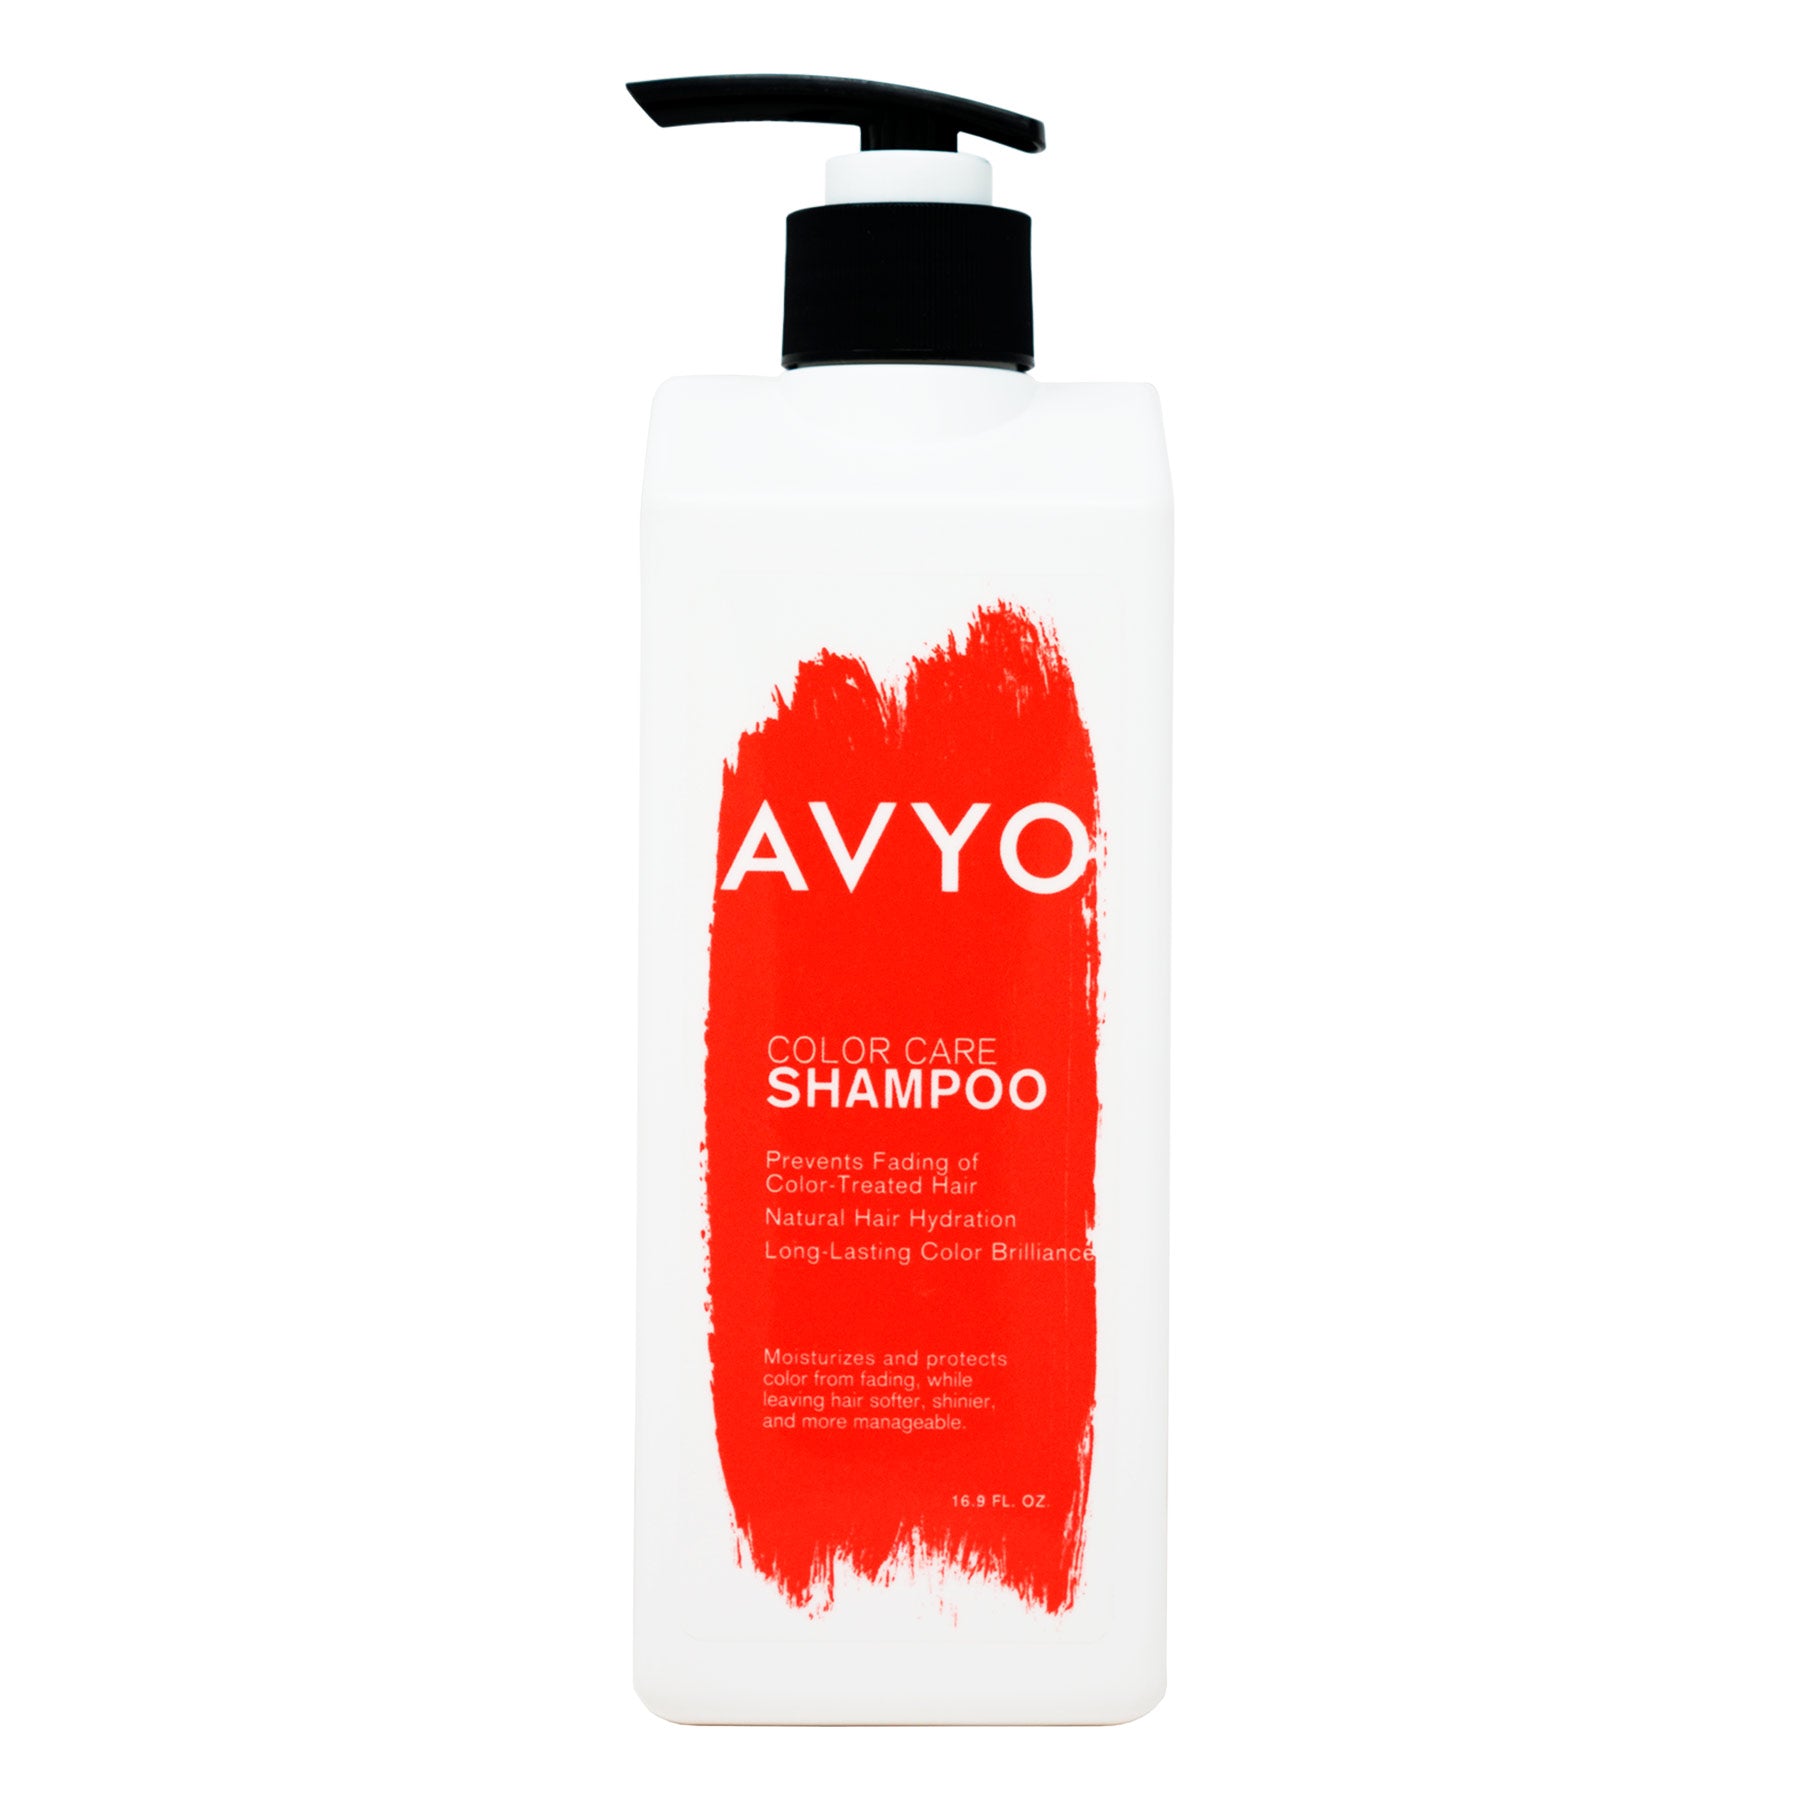 A white bottle of AVYO Color Care Shampoo with a vibrant red paint stroke design on the front. The label features the AVYO logo and states it prevents fading of color-treated hair, provides natural hair hydration, and ensures long-lasting color brilliance. The product offers 16.9 FL OZ of shampoo and includes additional benefits like moisturization and protection against color fading, leaving hair softer, shinier, and more manageable.